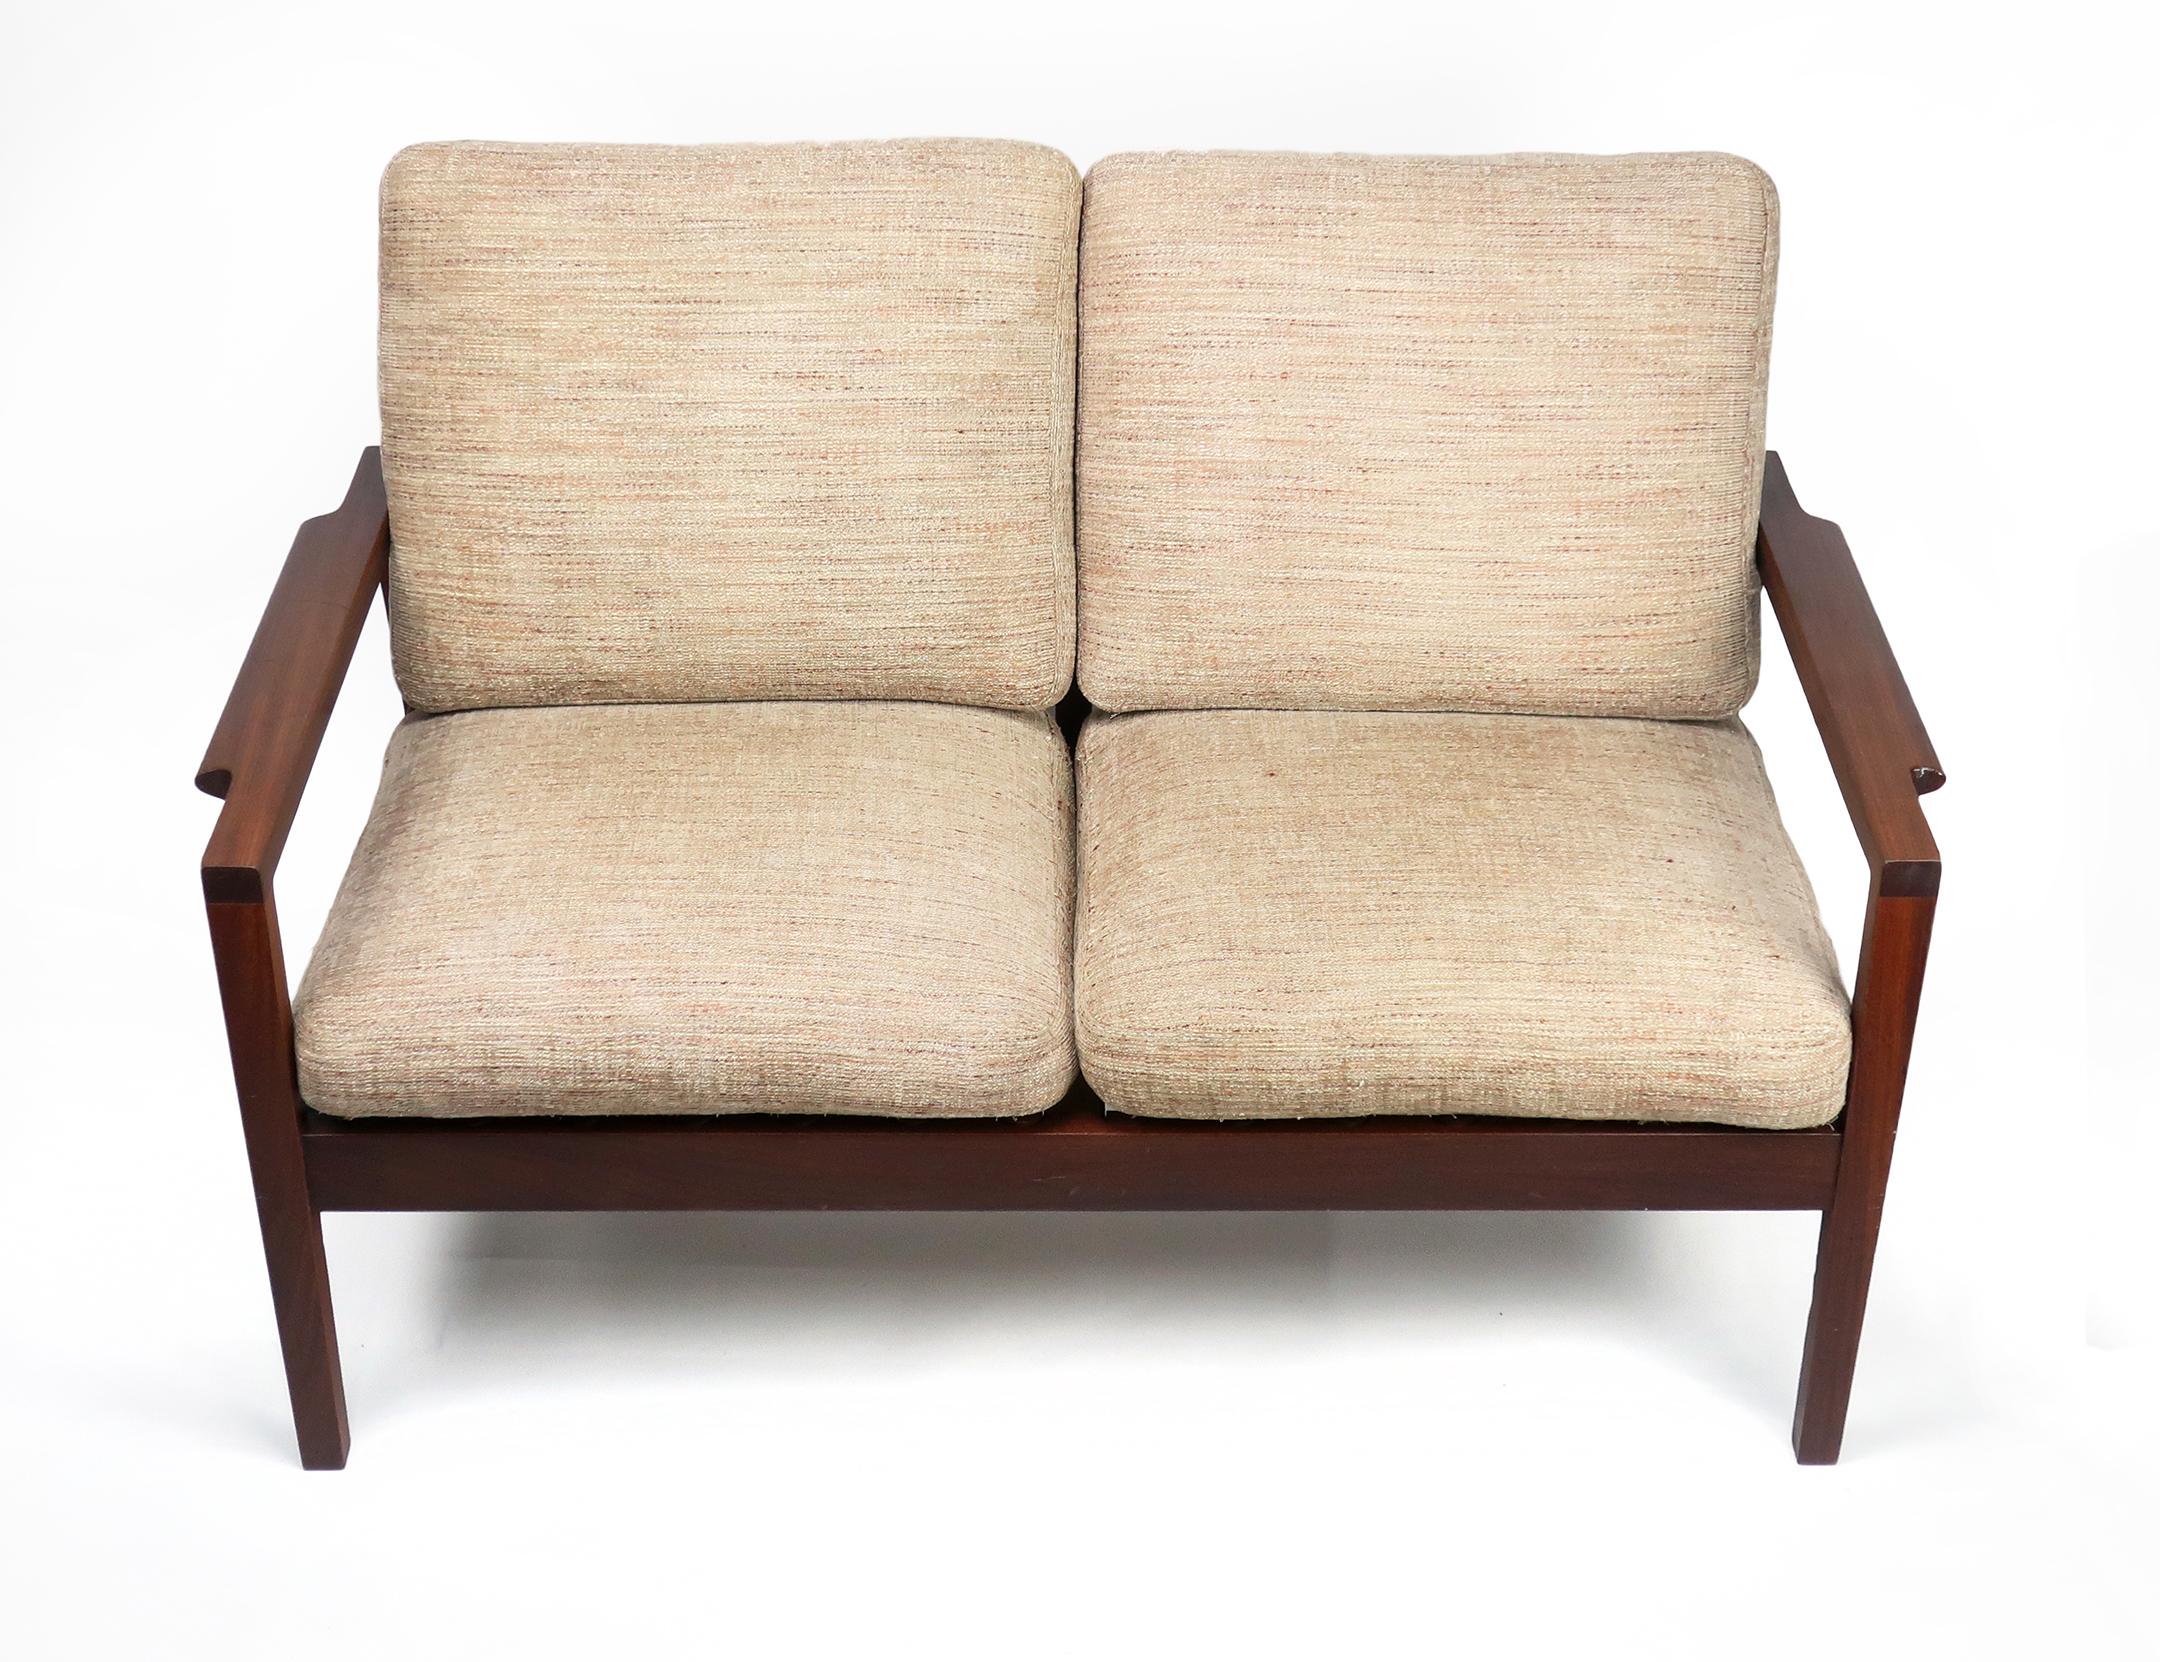 A lovely two seat teak couch by Canadian Modern furniture maker RS Associates of Montreal. Frame is the rich reddish brown of mid-century teak furniture and the soft tan upholstery has traces of brown, red and green and sits on rubberized metal seat